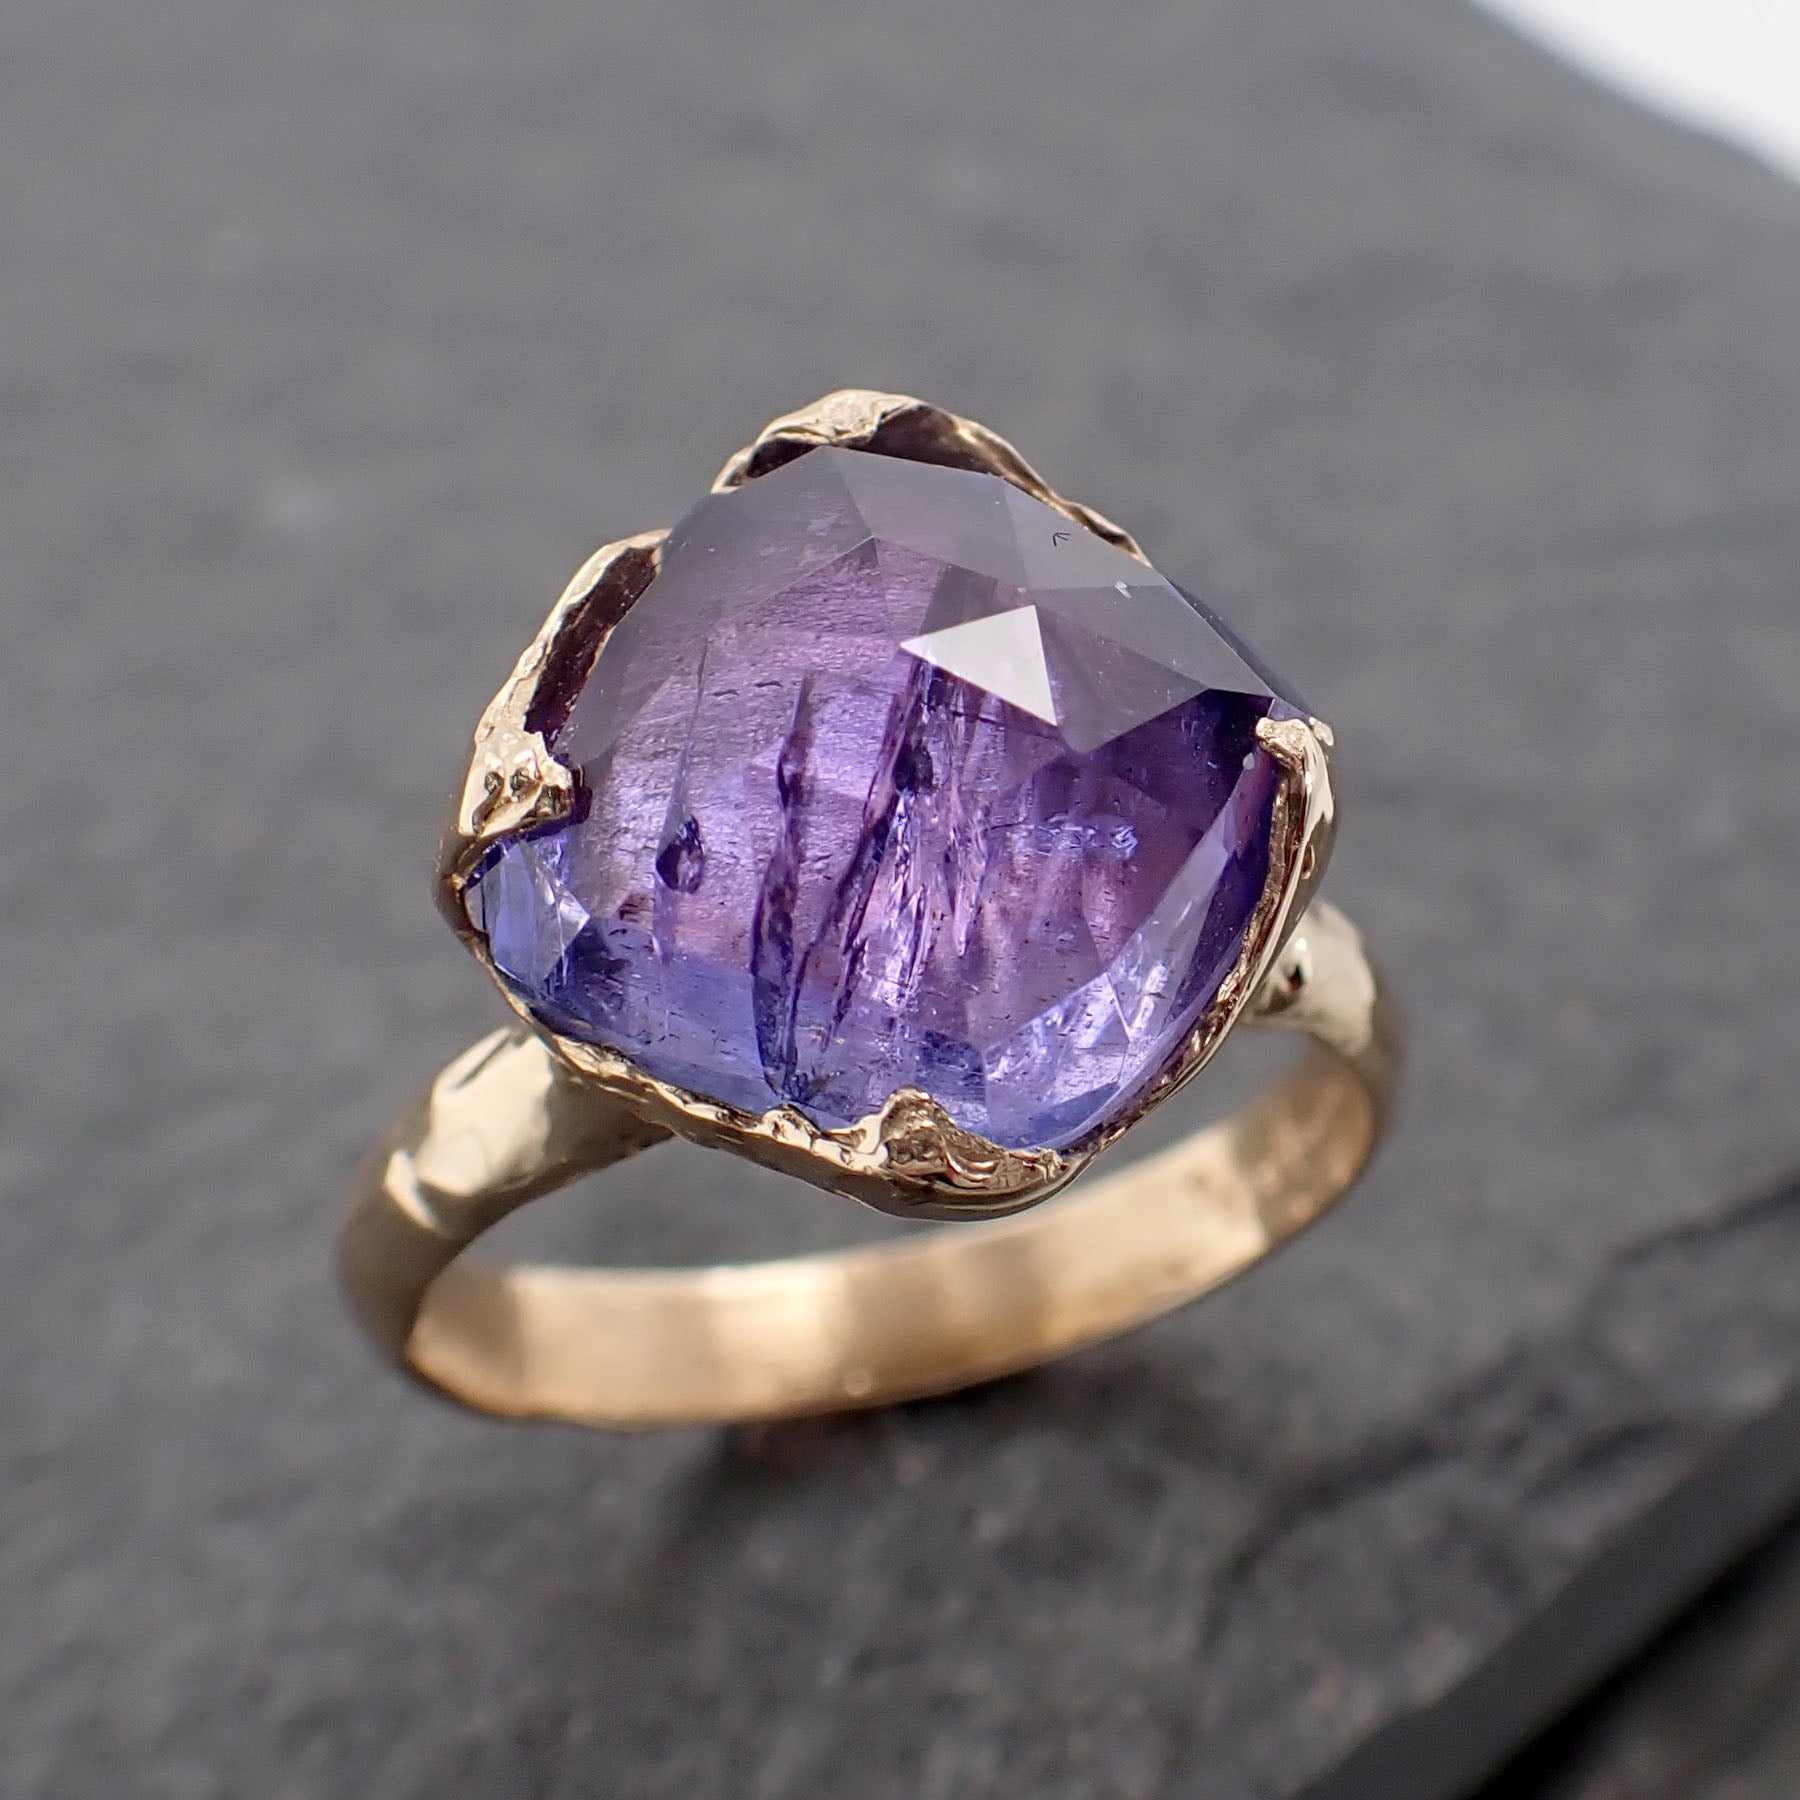 fancy cut tanzanite crystal solitaire 18k recycled yellow gold ring tanzanite stacking statement byangeline 2421 Alternative Engagement